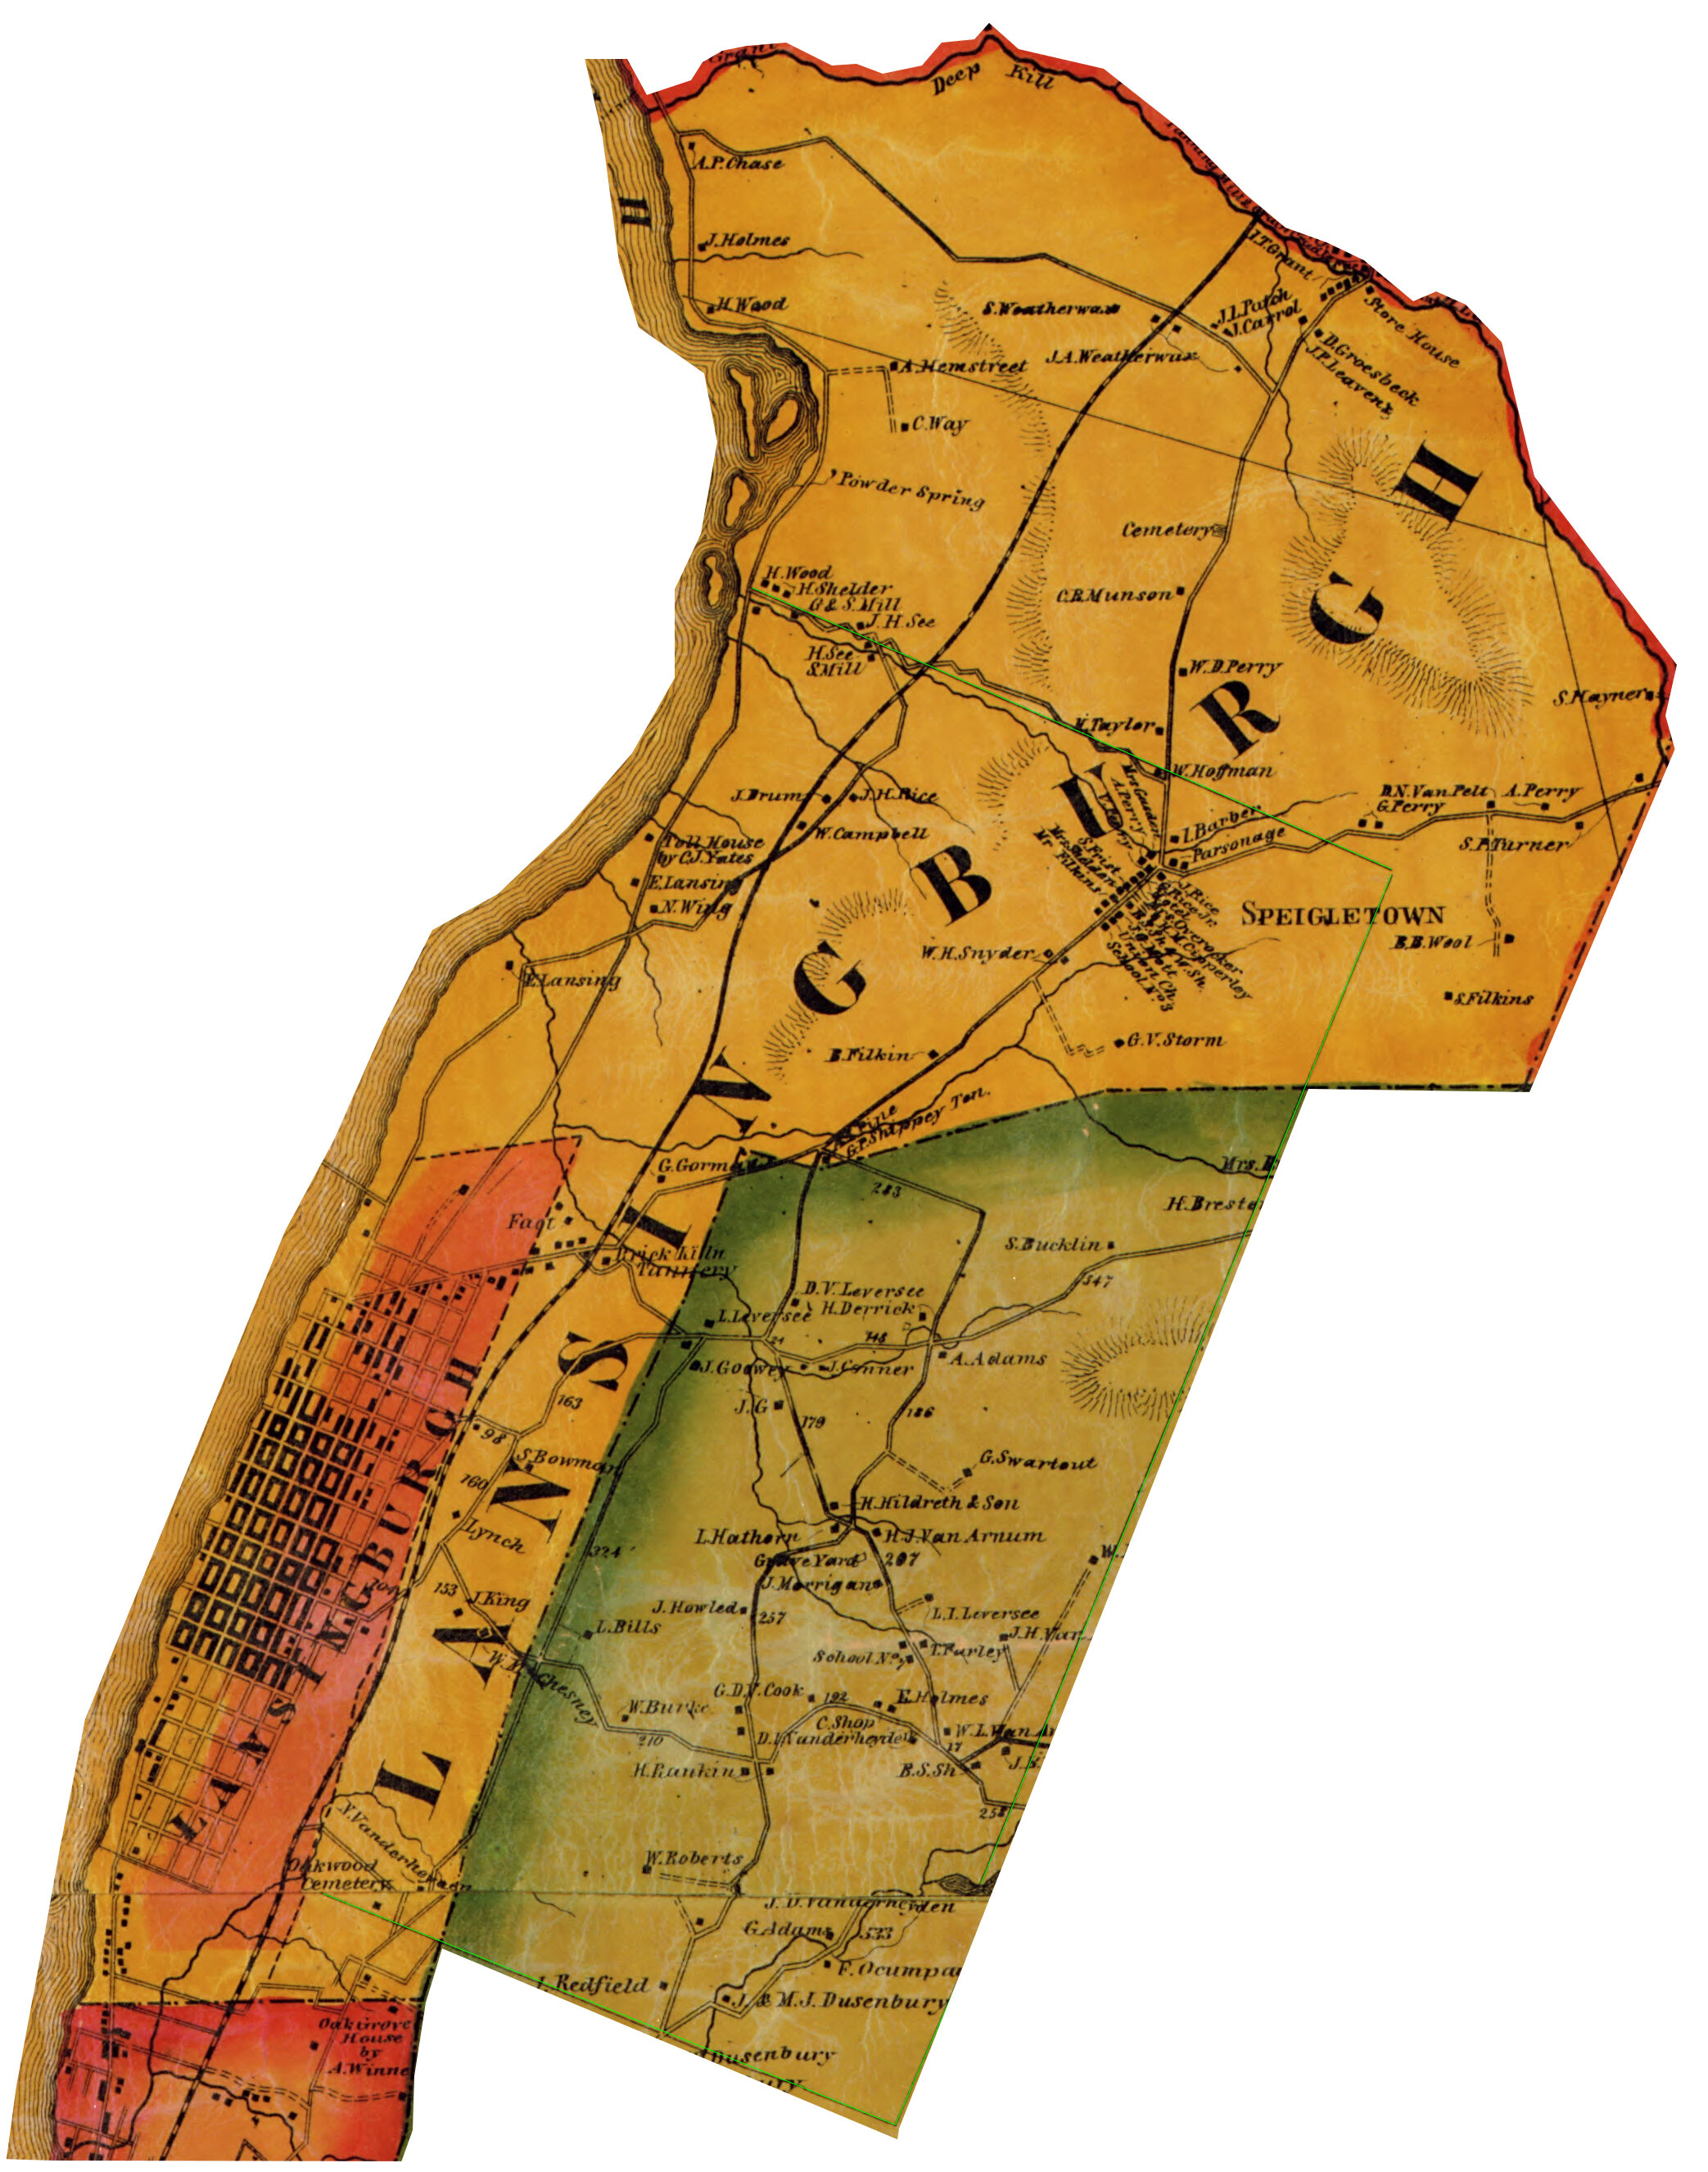 Image of Town of Lansingburgh with Batestown area (red at bottom) and remainder of Stone Arabia (green) cropped from Map of Rensselaer Co. New York by D. J. Lake & S. N. Beers, 1861. http://www.loc.gov/item/2009583522